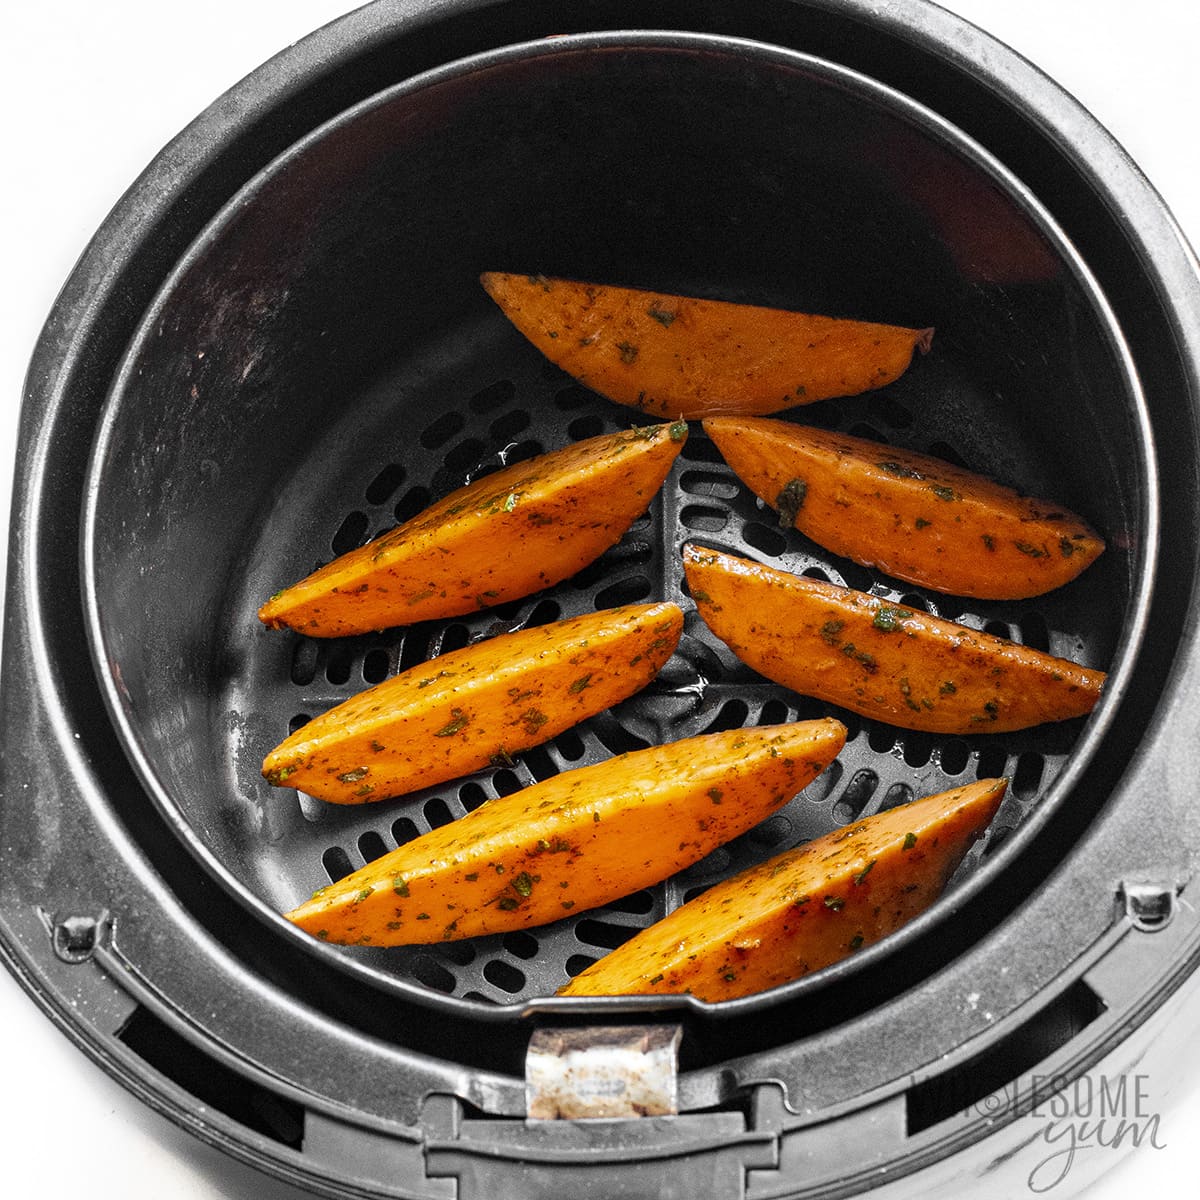 Sweet potatoes in the air fryer without overcrowding.